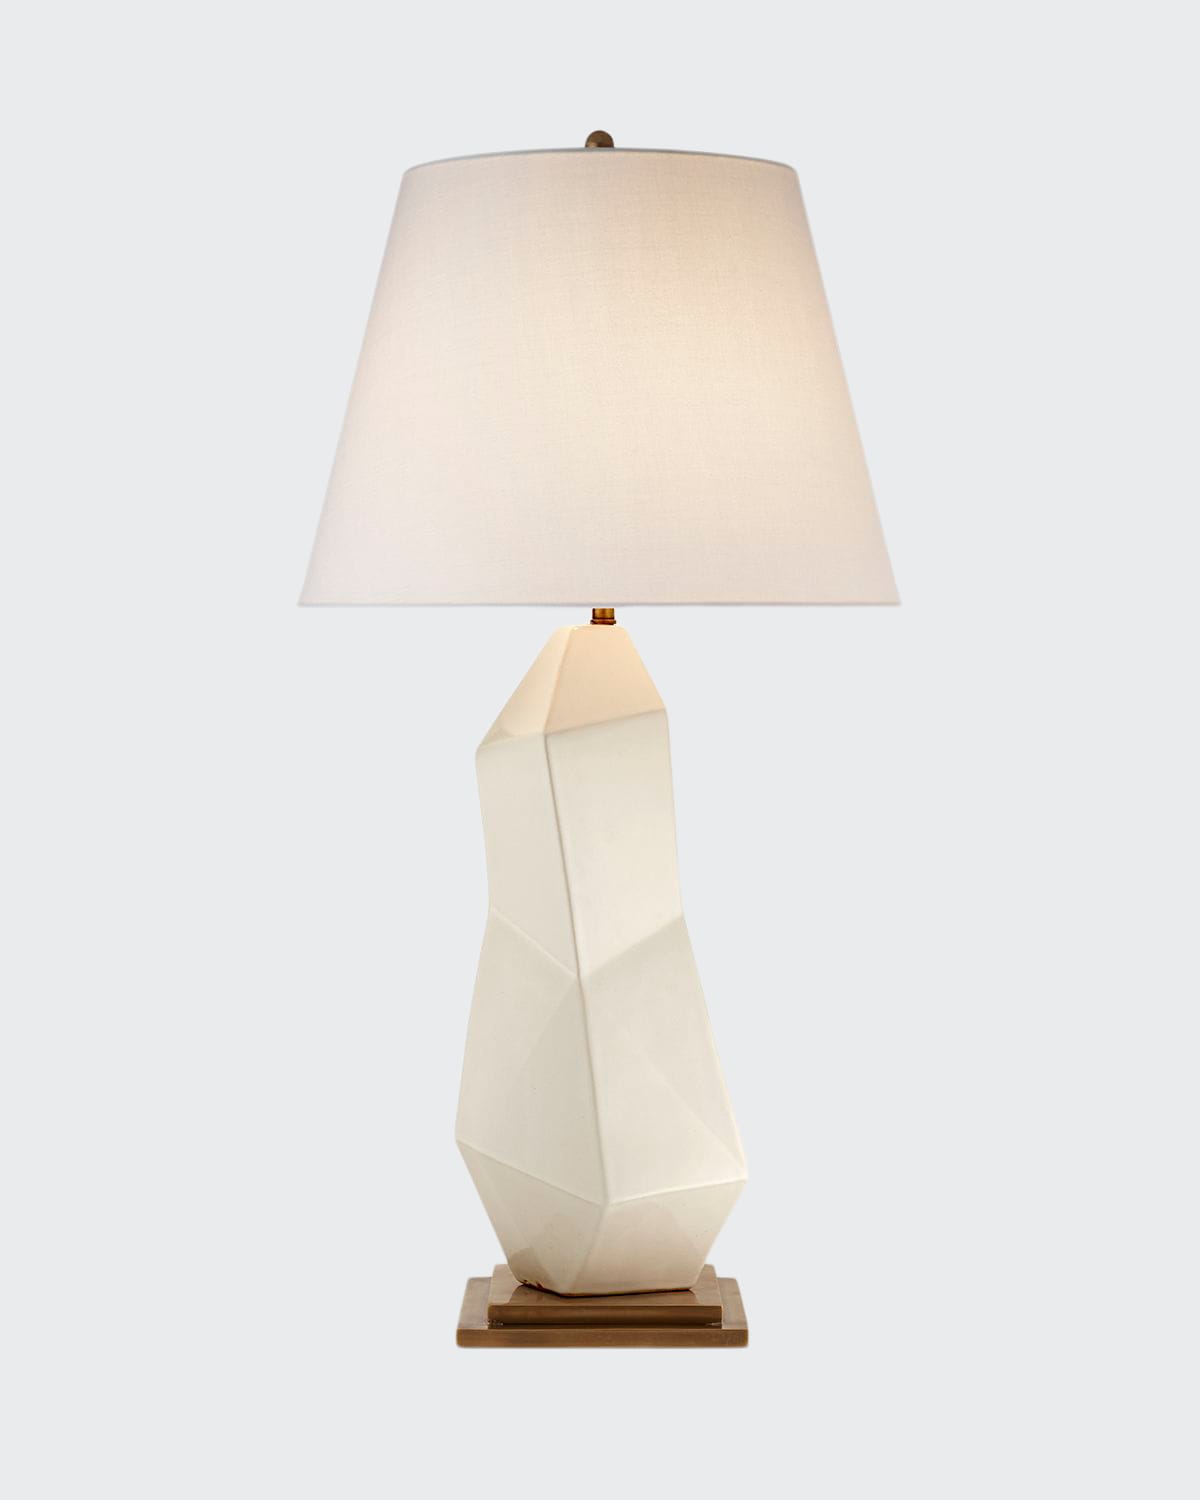 Kelly Wearstler For Visual Comfort Signature Bayliss Table Lamp In White